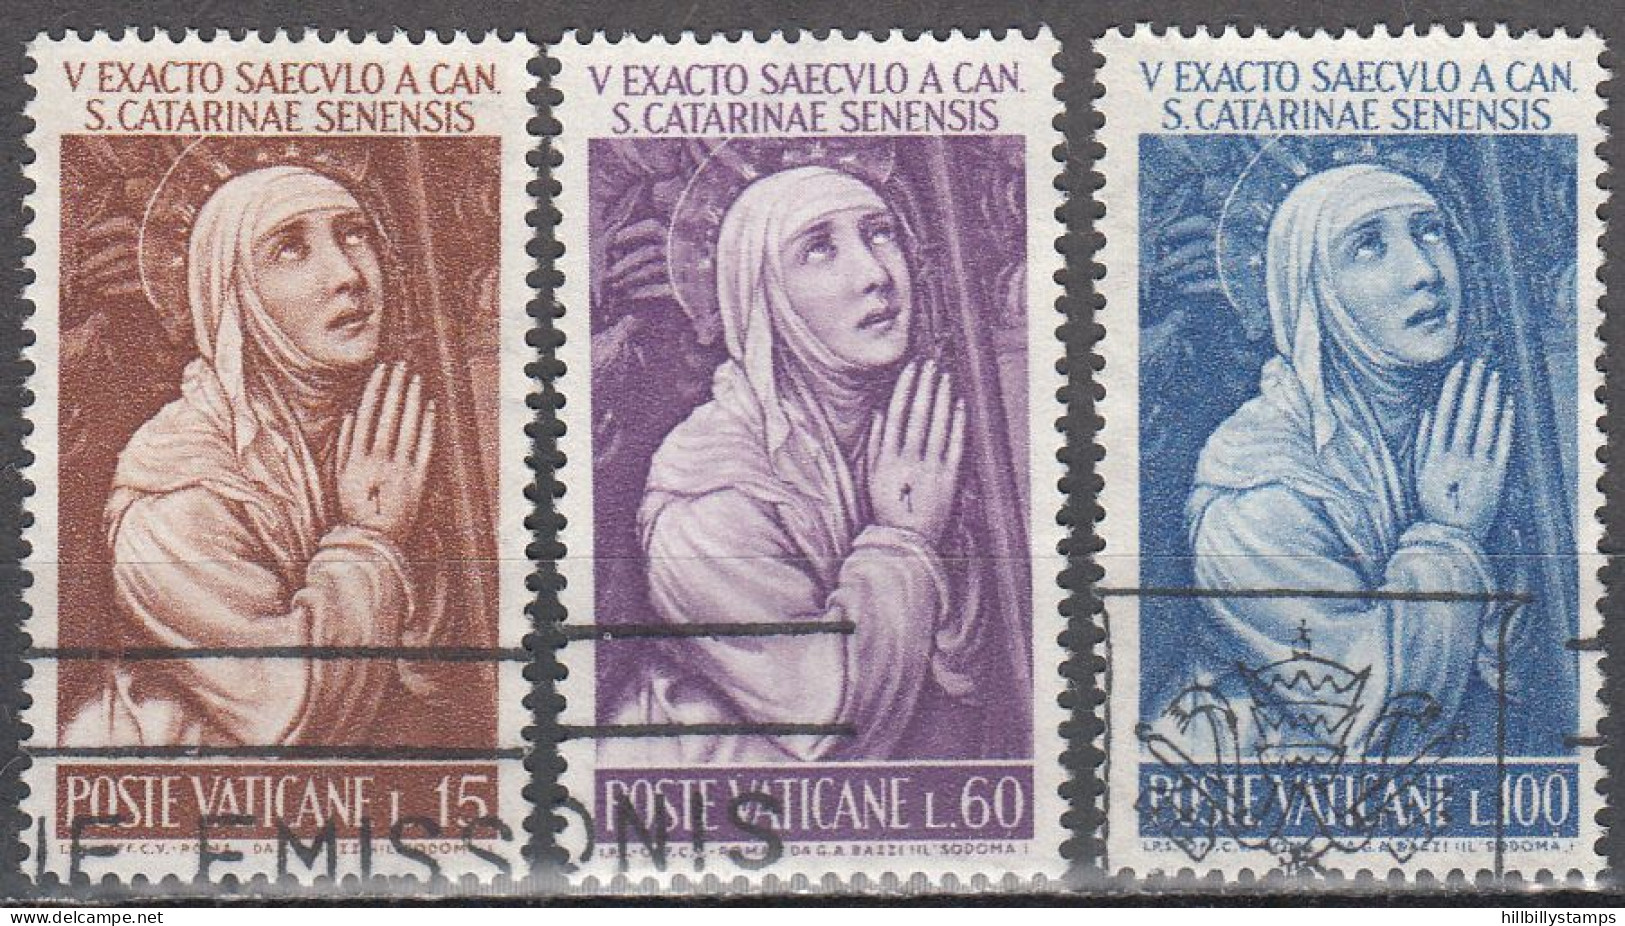 VATICAN   SCOTT NO 335-37   USED   YEAR  1962 - Used Stamps